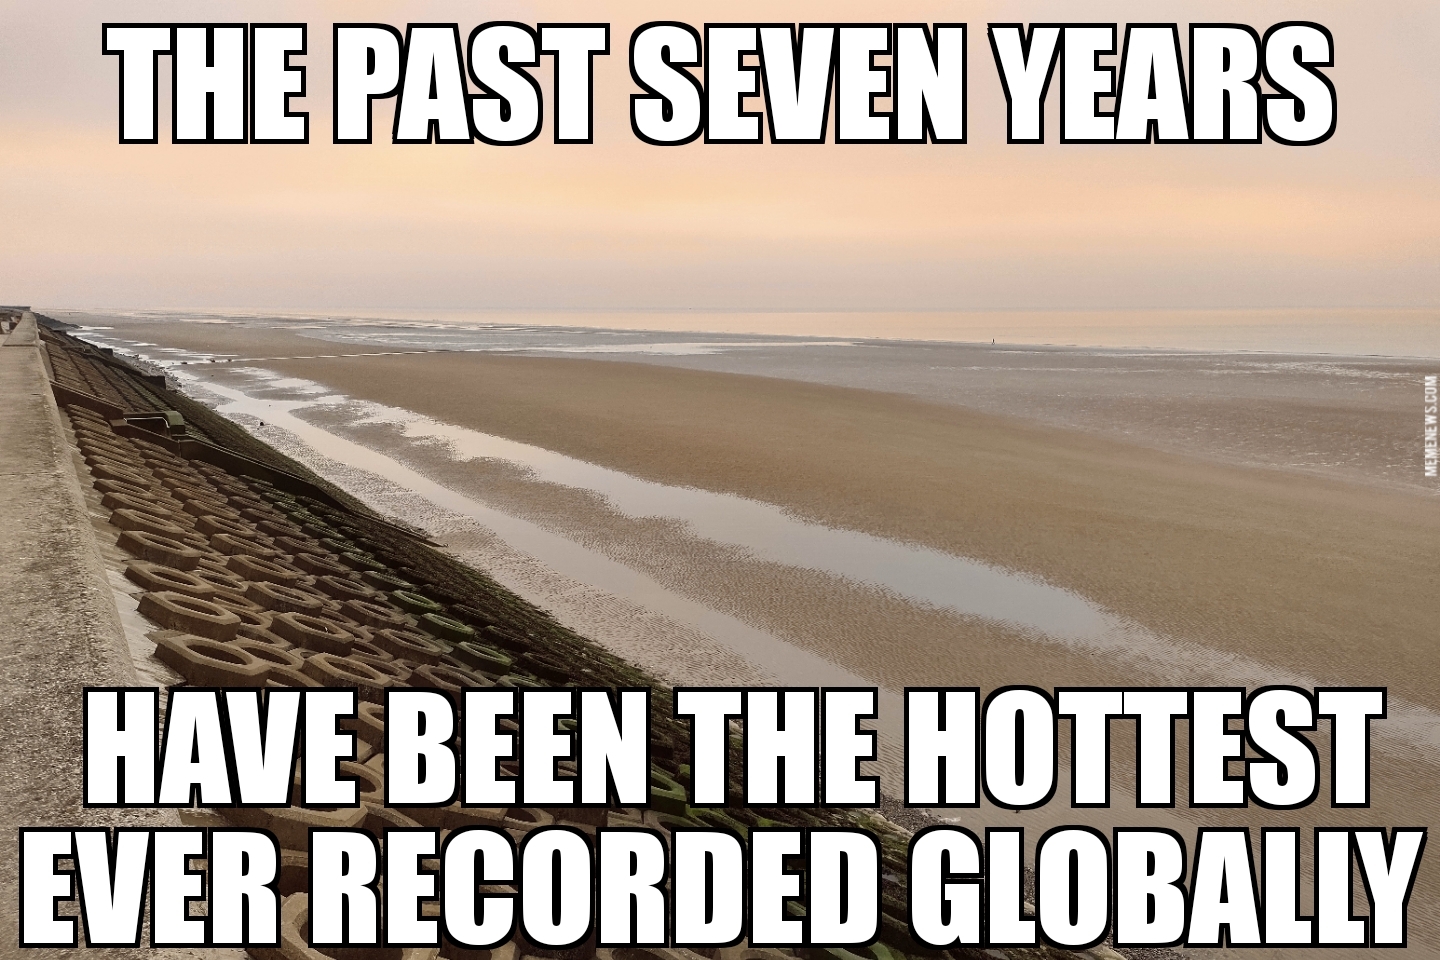 Seven hottest years